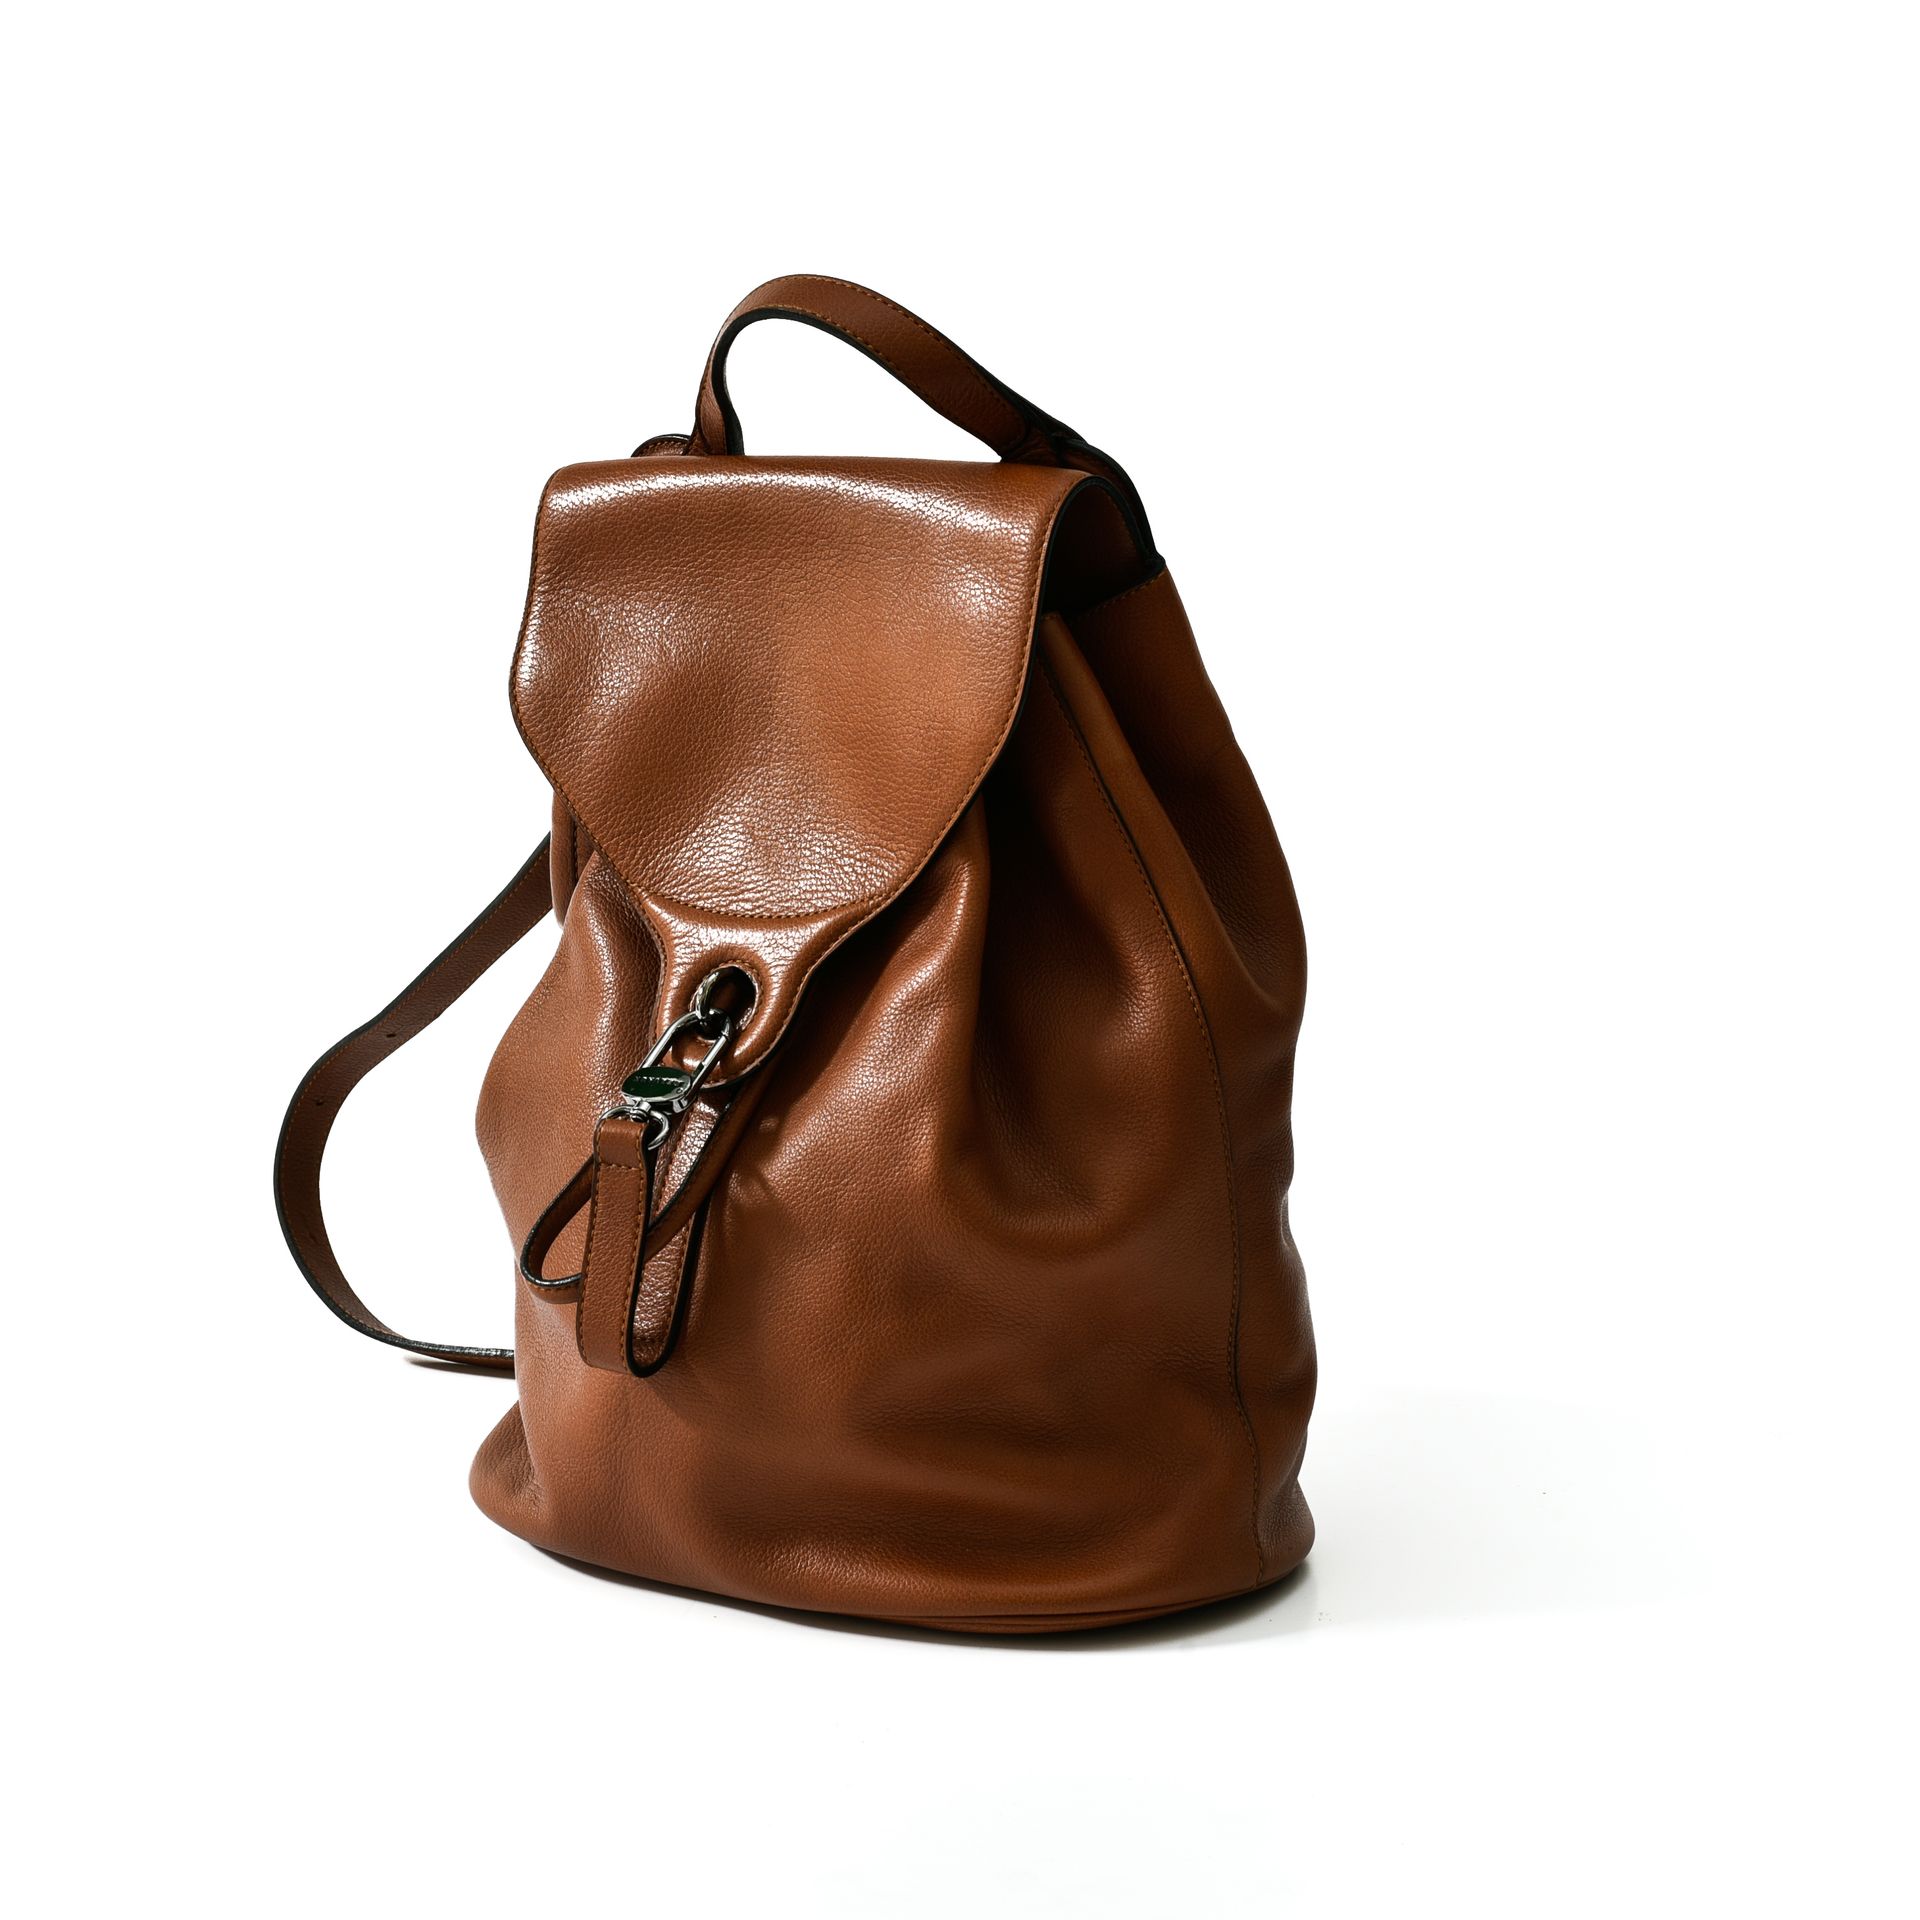 Delvaux "Soleil" backpack



Supple caramel-coloured grained leather. Dark palla&hellip;